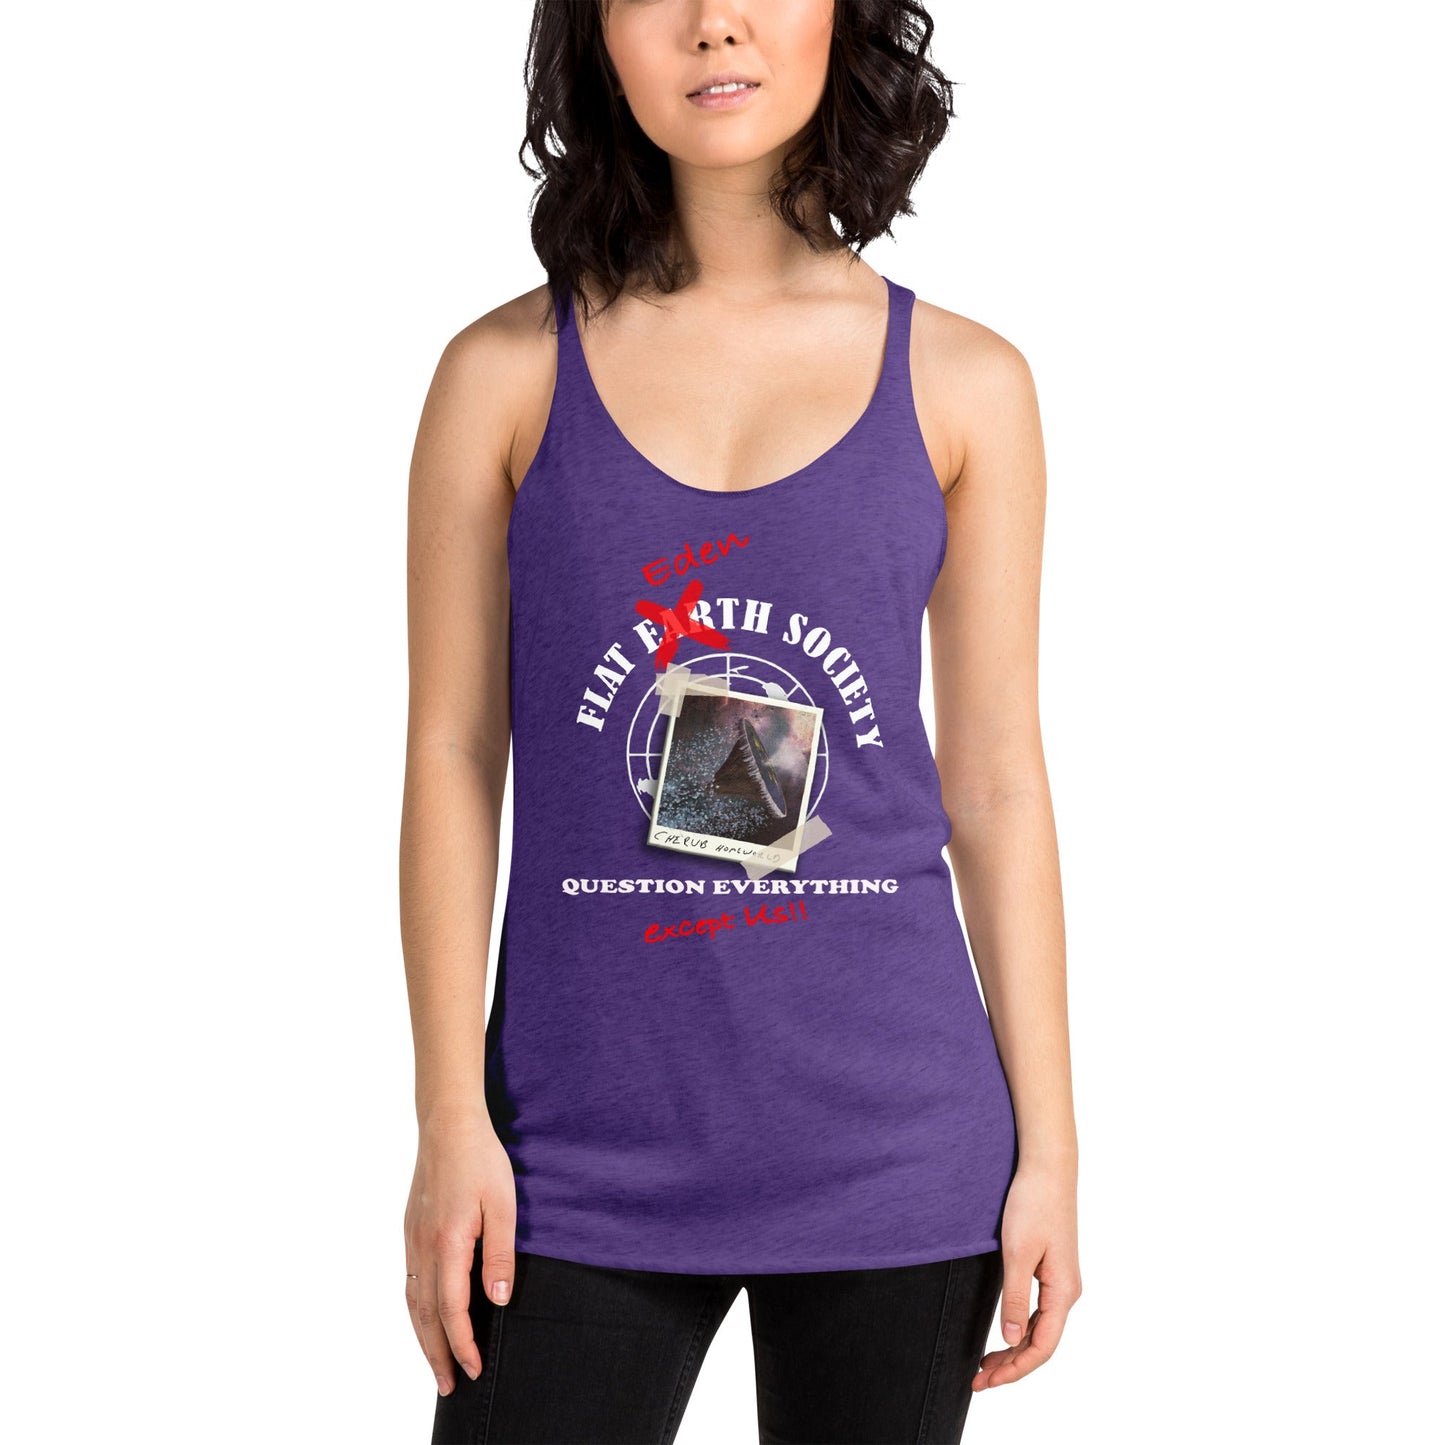 Women's Racerback Tank | Intergalactic Space Force 2 | Flat Eden Society - Spectral Ink Shop - Shirts & Tops -2753985_6641